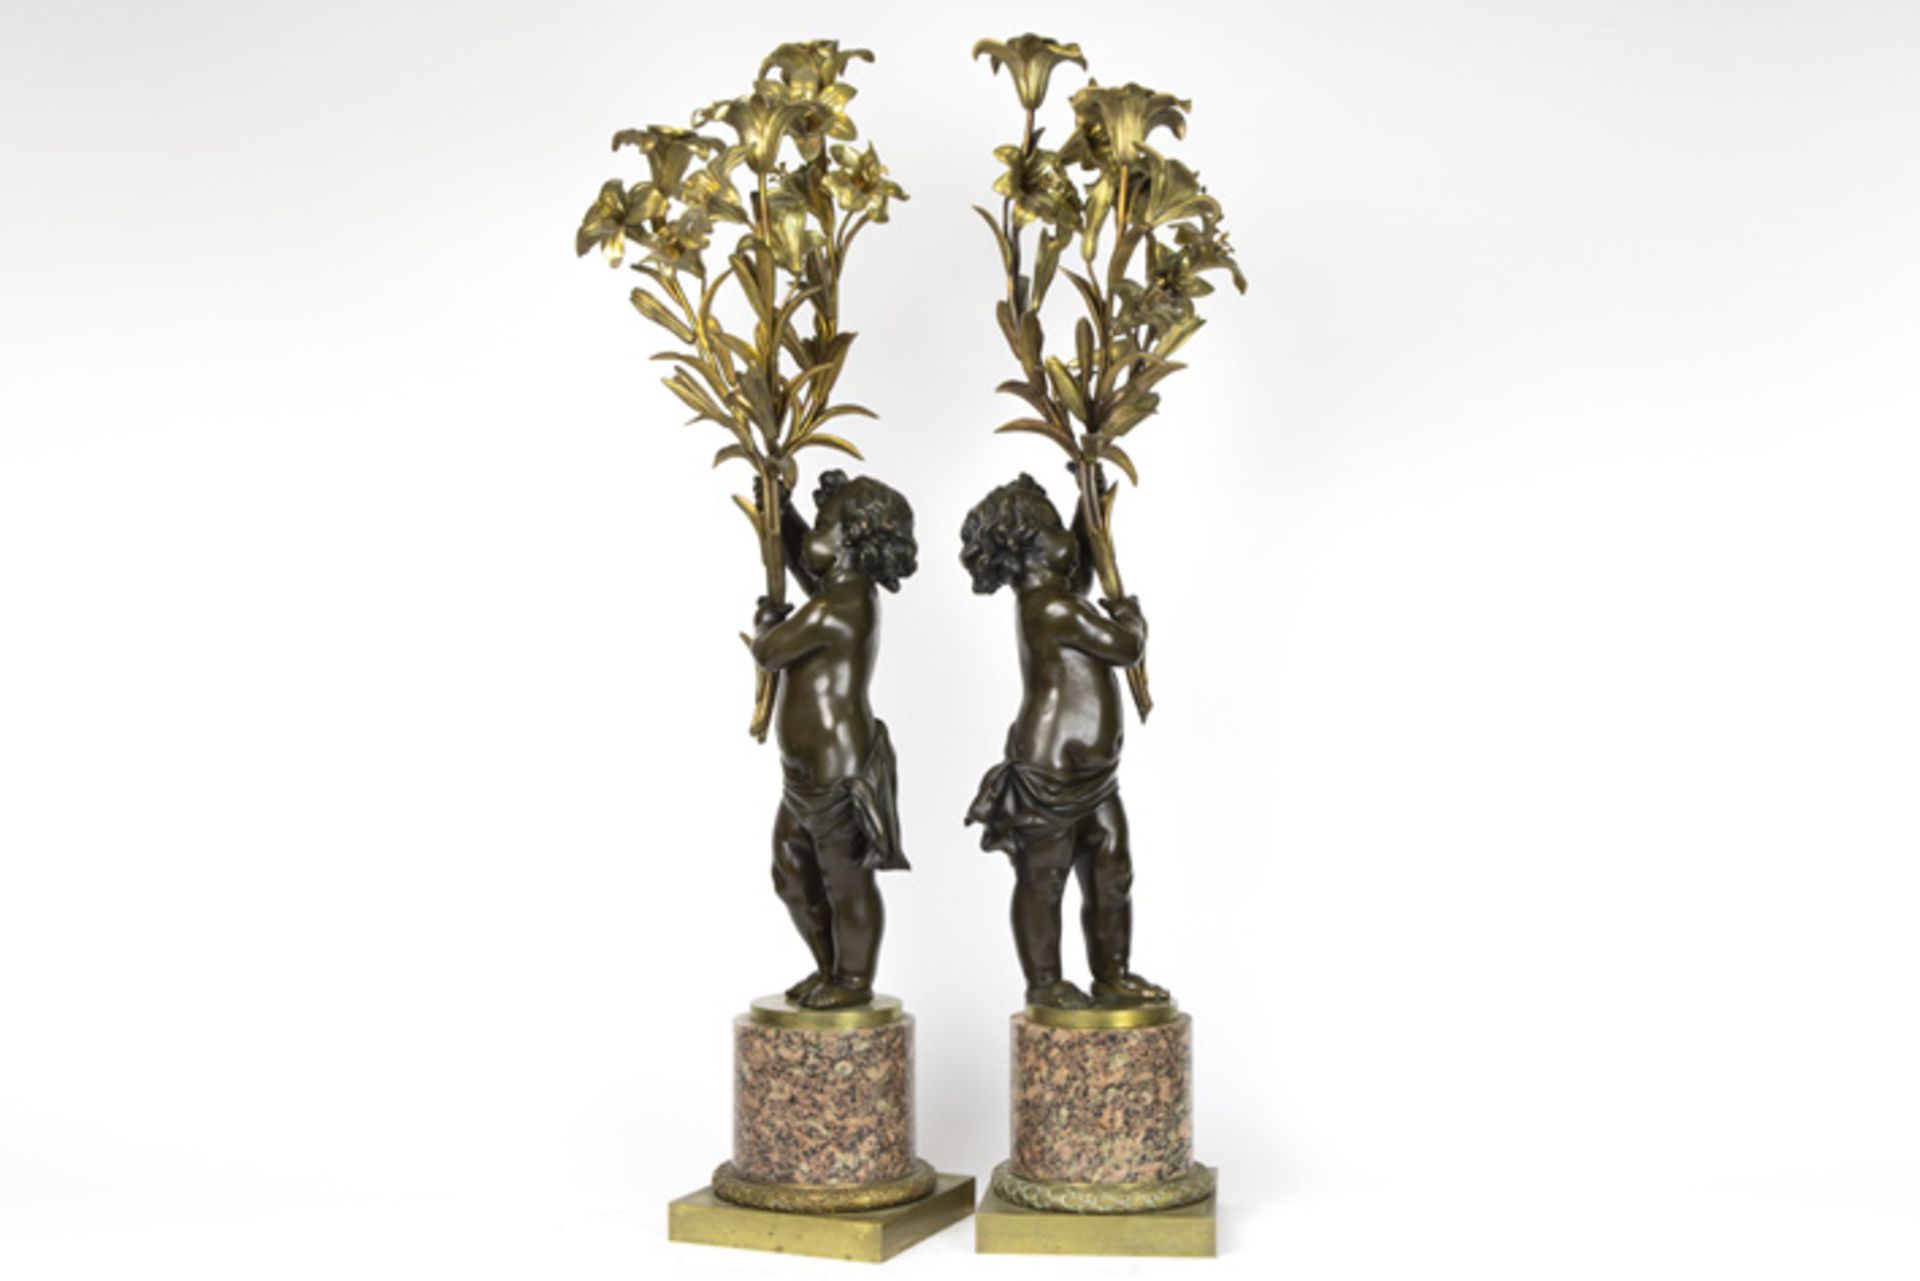 pair of nice 19th Cent. "Cupid" candelabras in partially brown patinated partially gilded bronze - Image 3 of 3